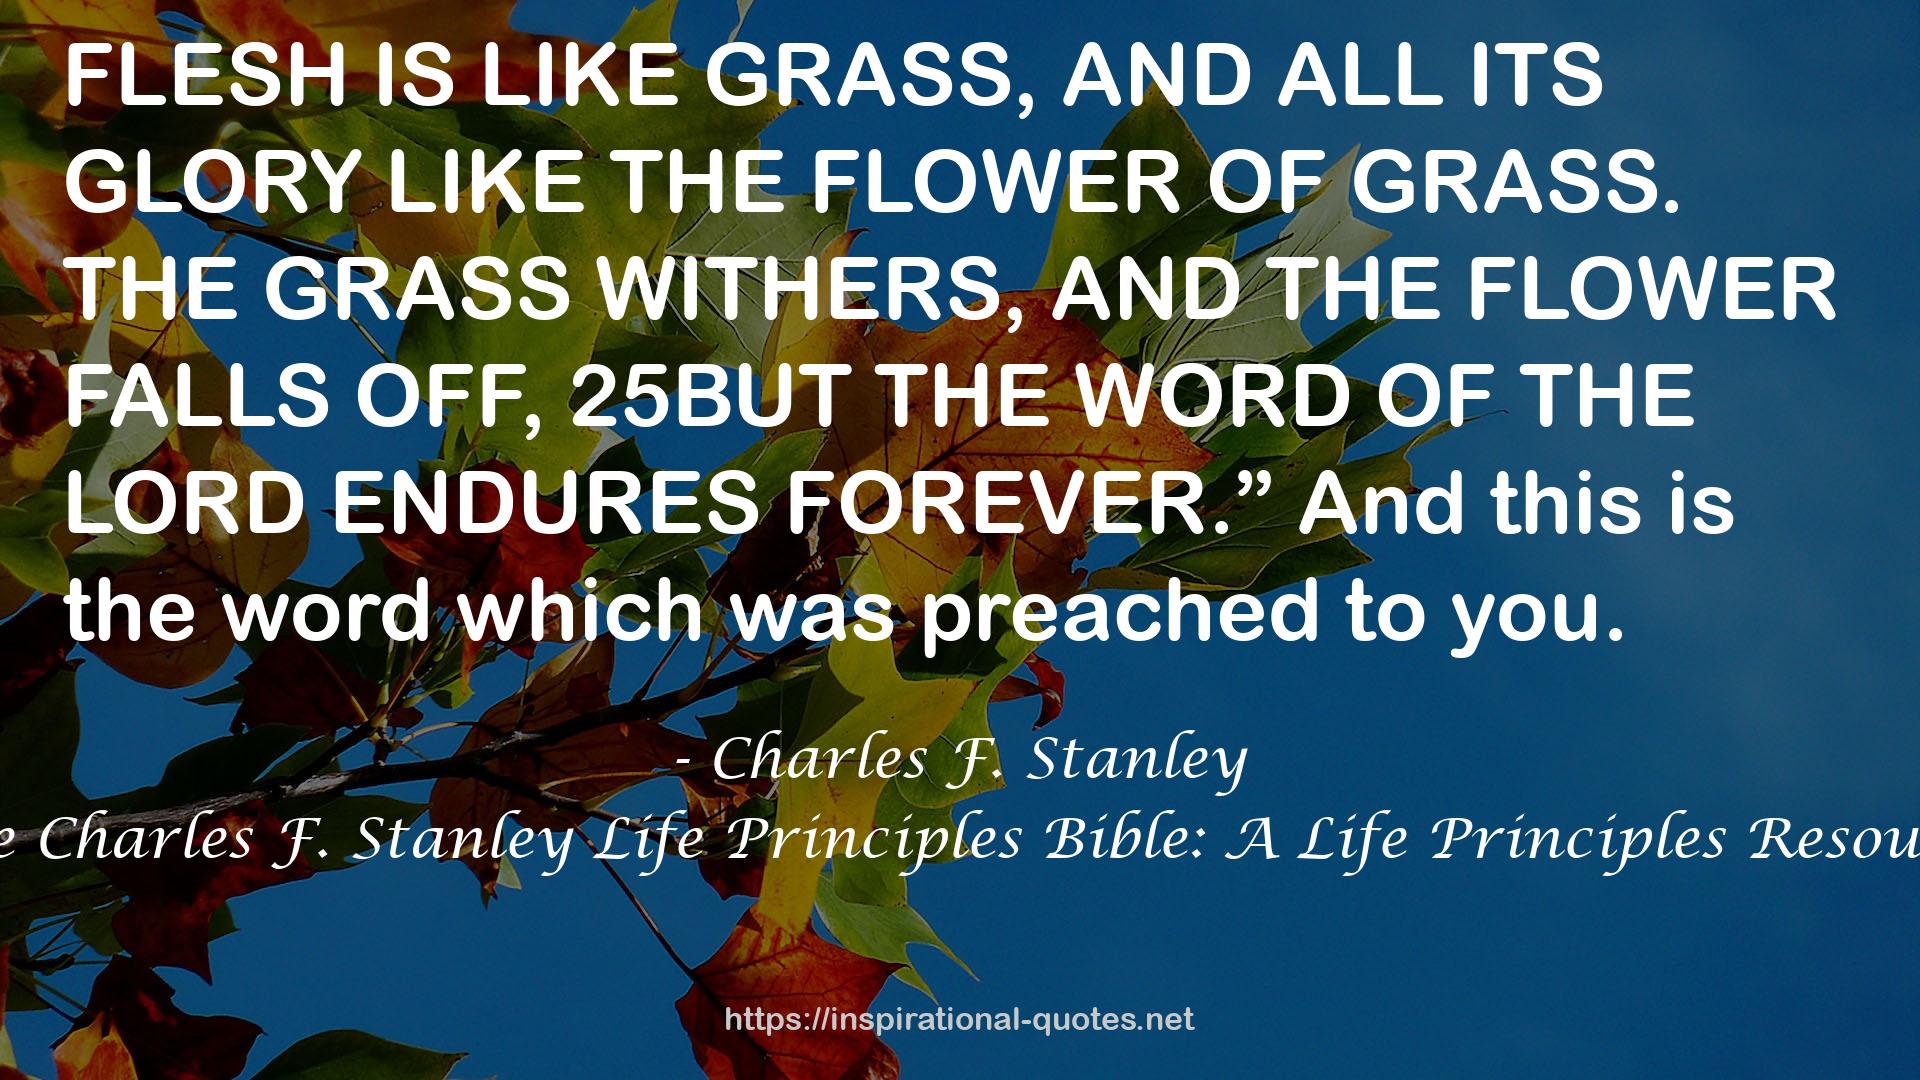 The Charles F. Stanley Life Principles Bible: A Life Principles Resource QUOTES